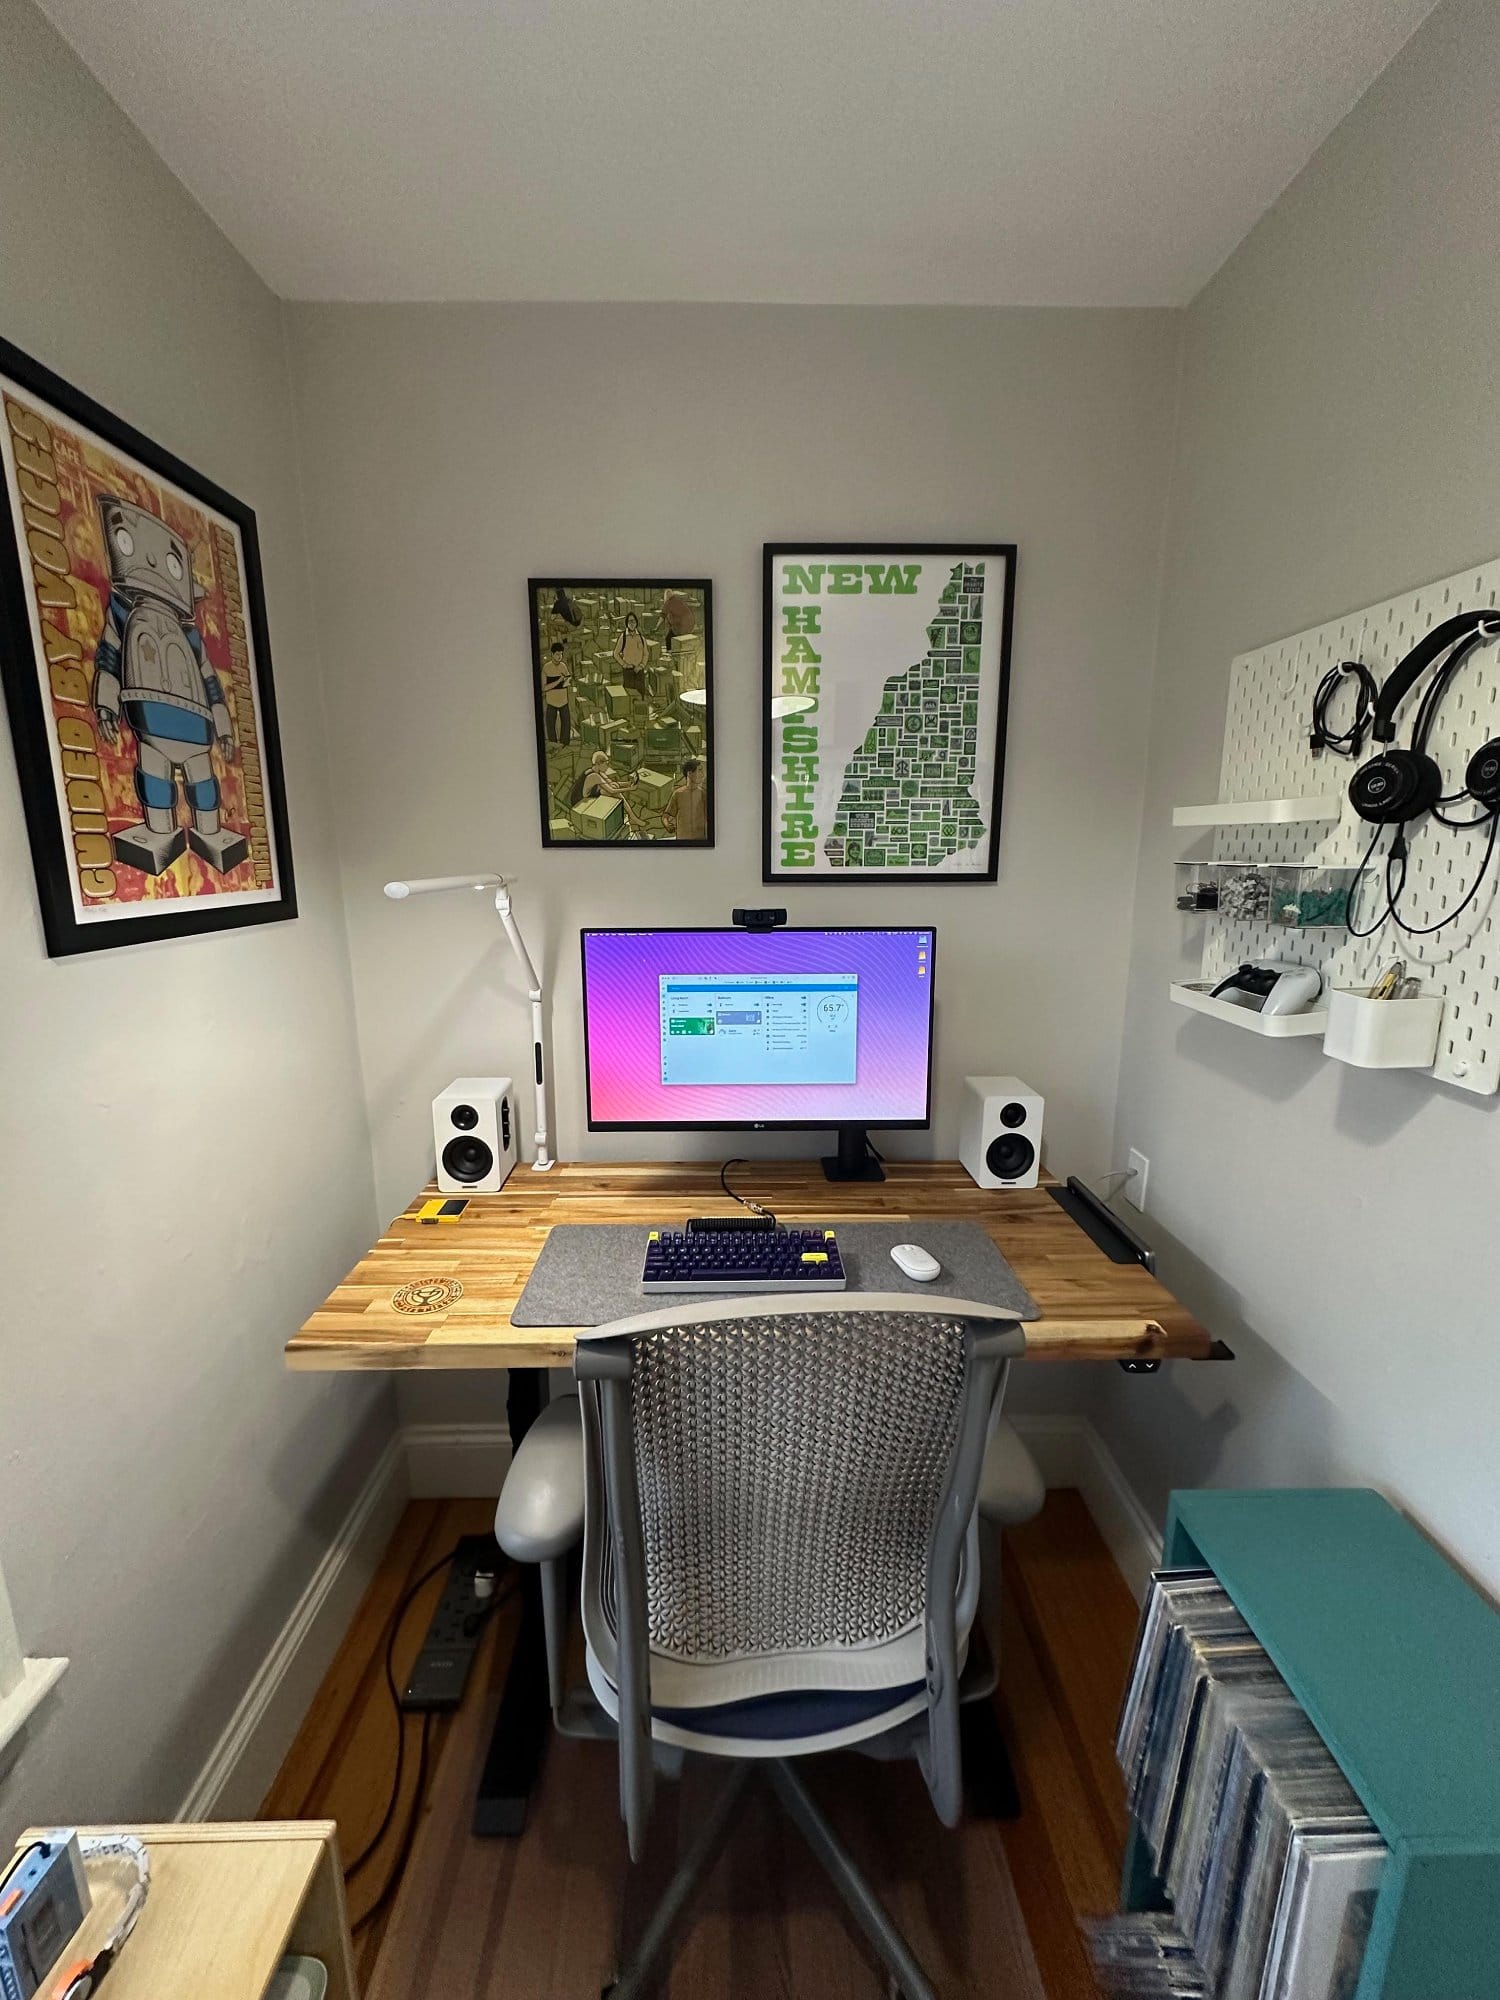 A small home office featuring a wooden desk with a computer, speakers, and various accessories, and decorated with framed artwork on the walls